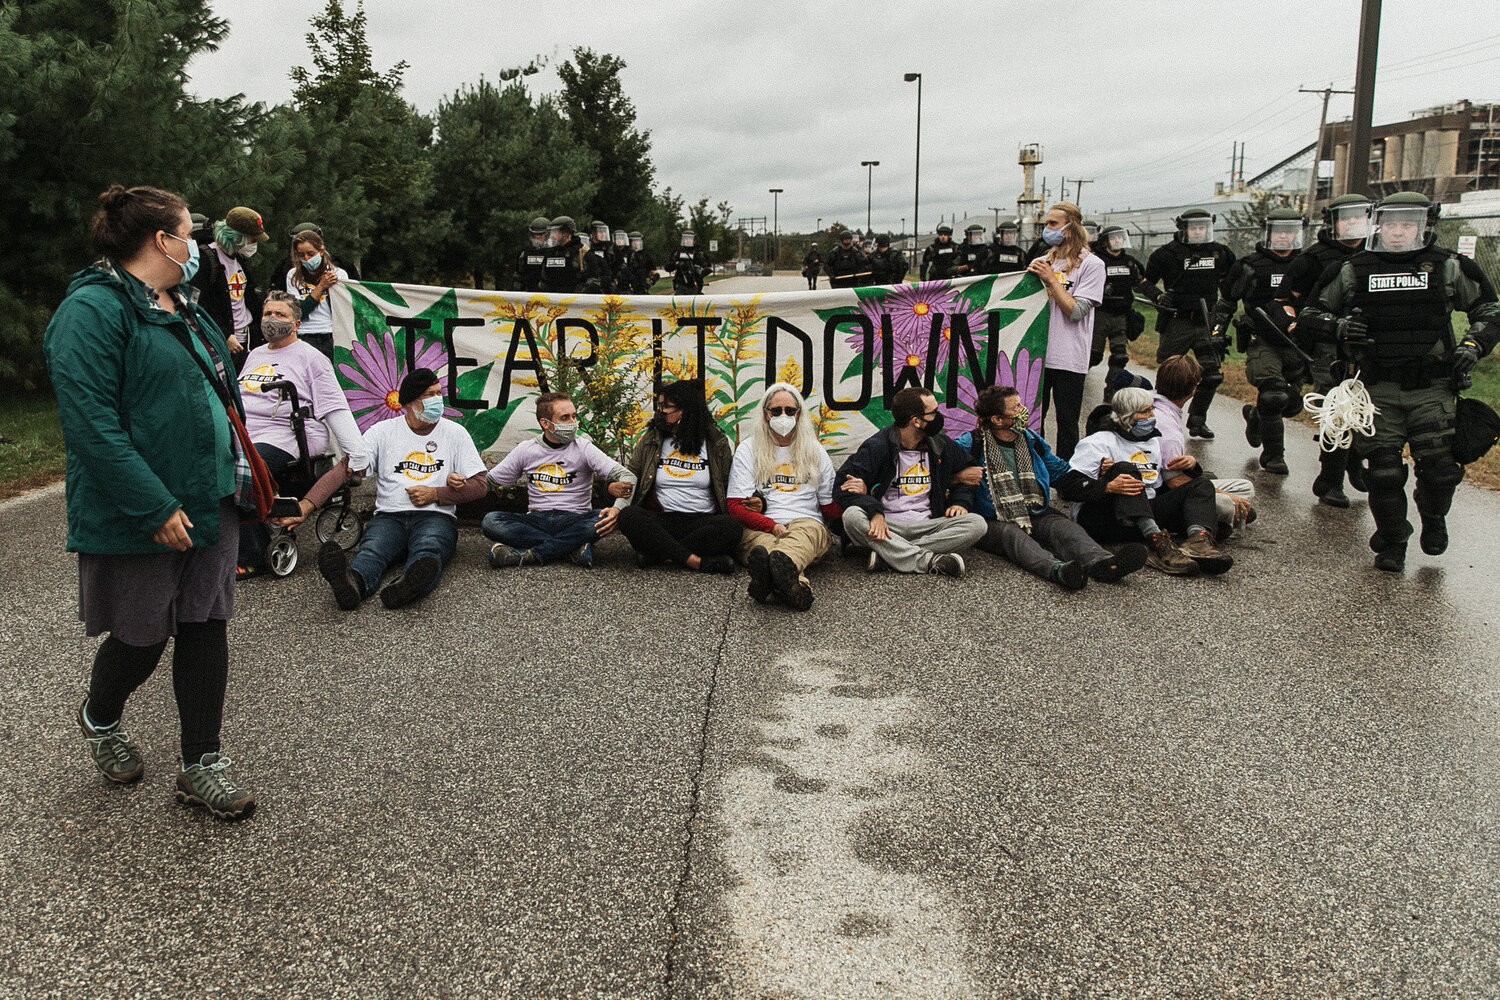 image of a group of individuals sitting on concrete in front of a banner that has flowers on it and the text "Tear it down." The coal plant in Bow, NH is in the distance and cops in riot gear are approaching the group.